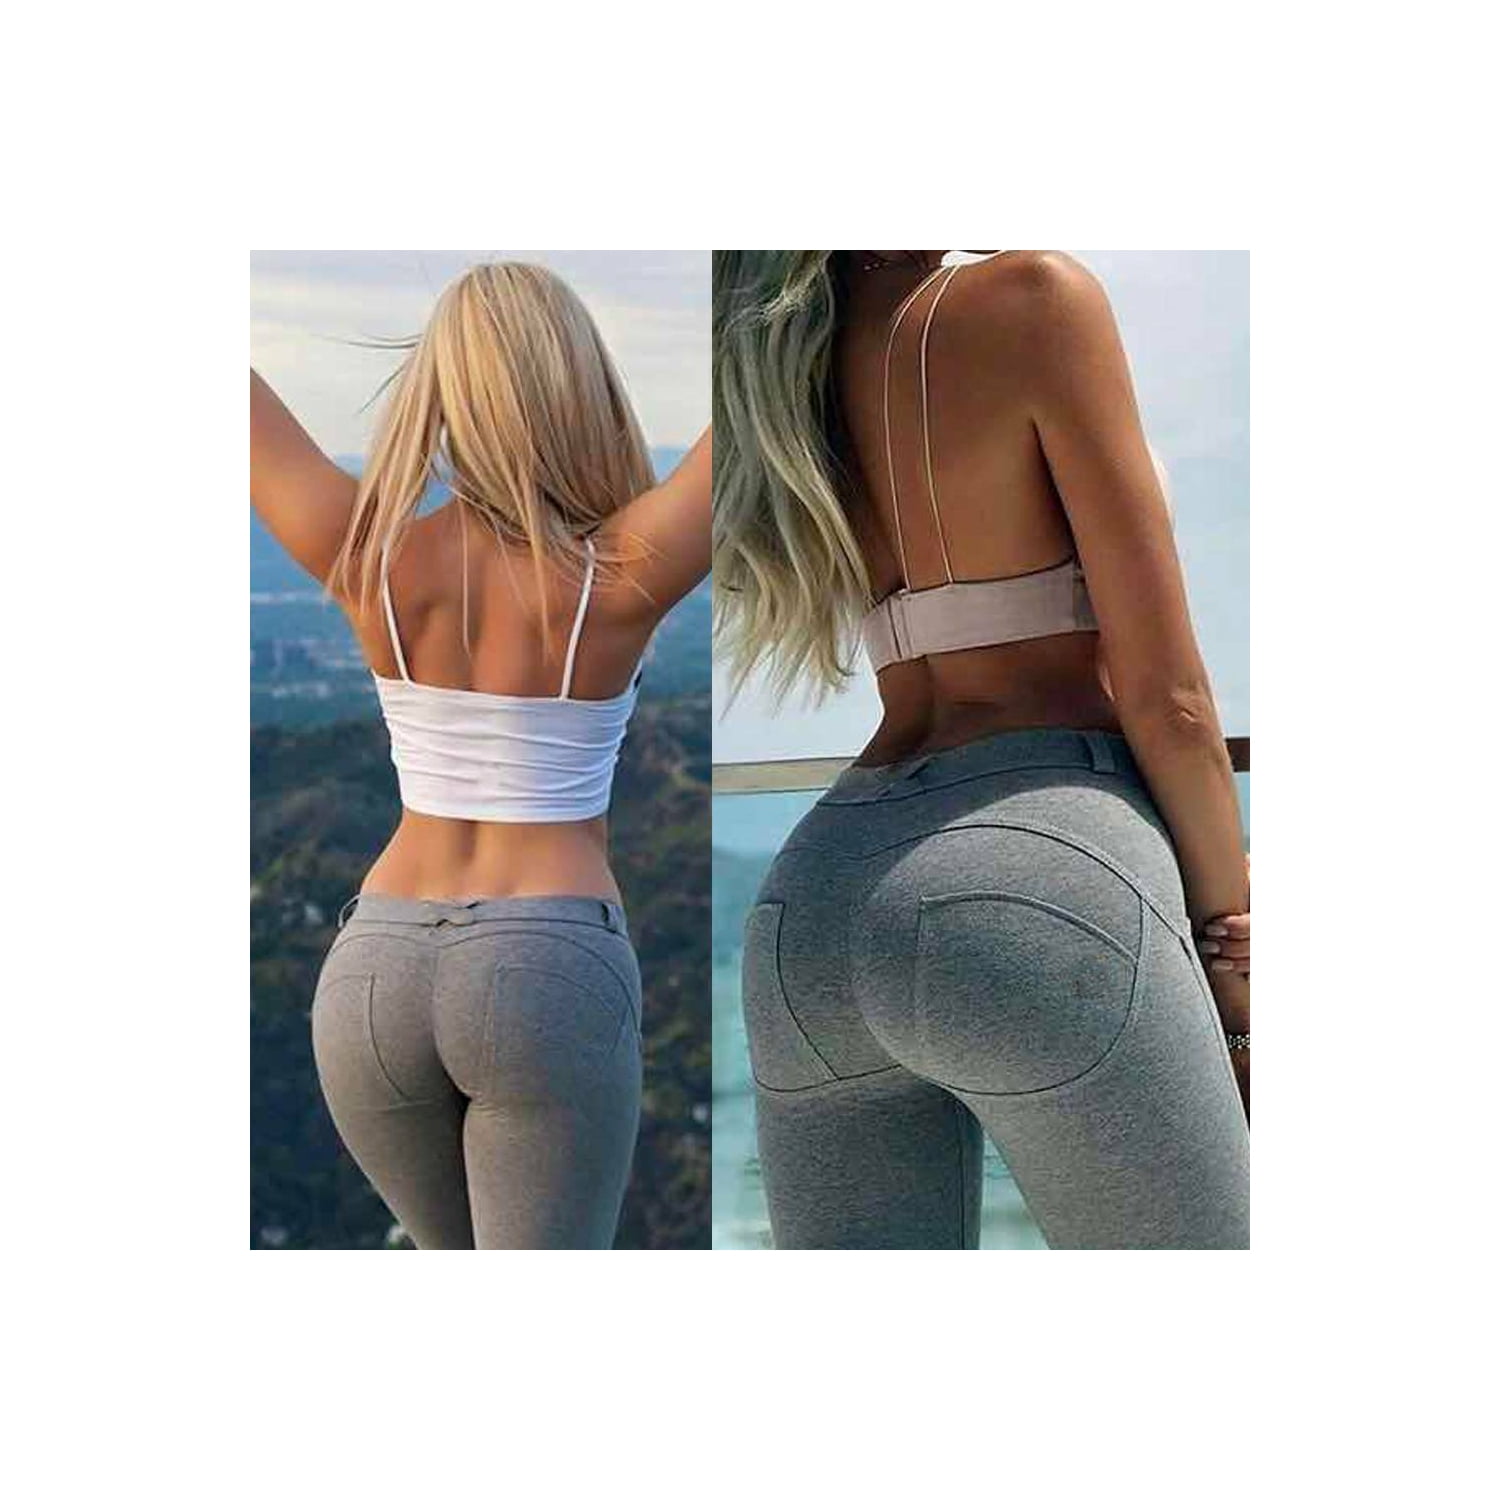 Buy ALONG FIT Leggings with Wine Bottle Pockets for Women High Waist Yoga  Pants Tummy Control Yoga Leggings for Workout Running at Amazonin